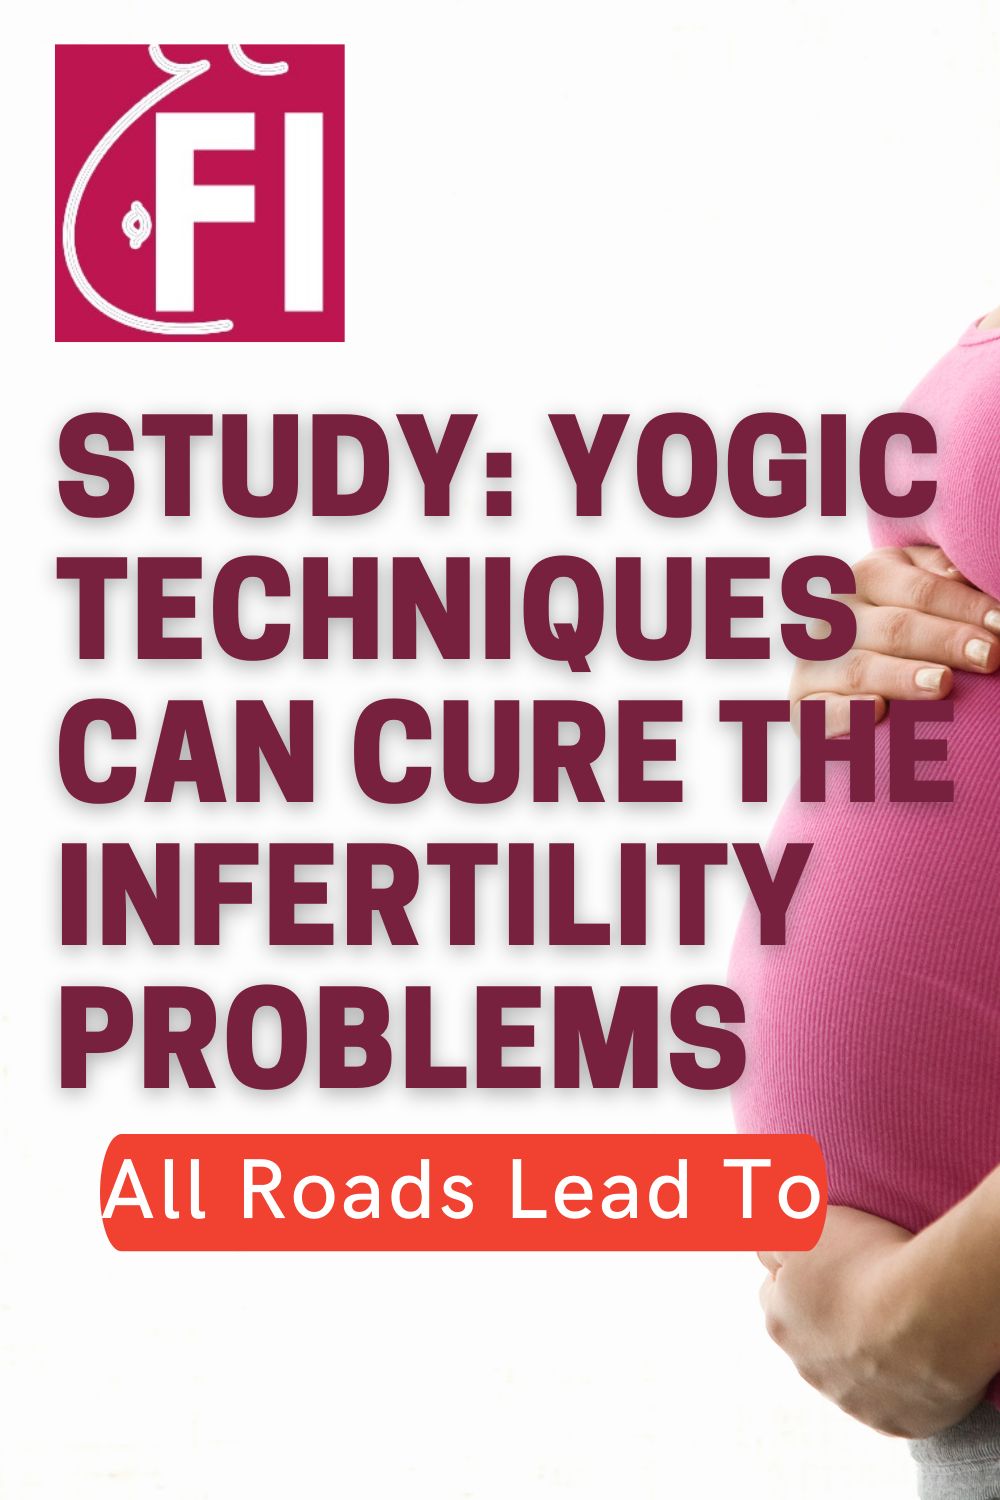 Study_Yogic Techniques Can Cure The Infertility Problems P